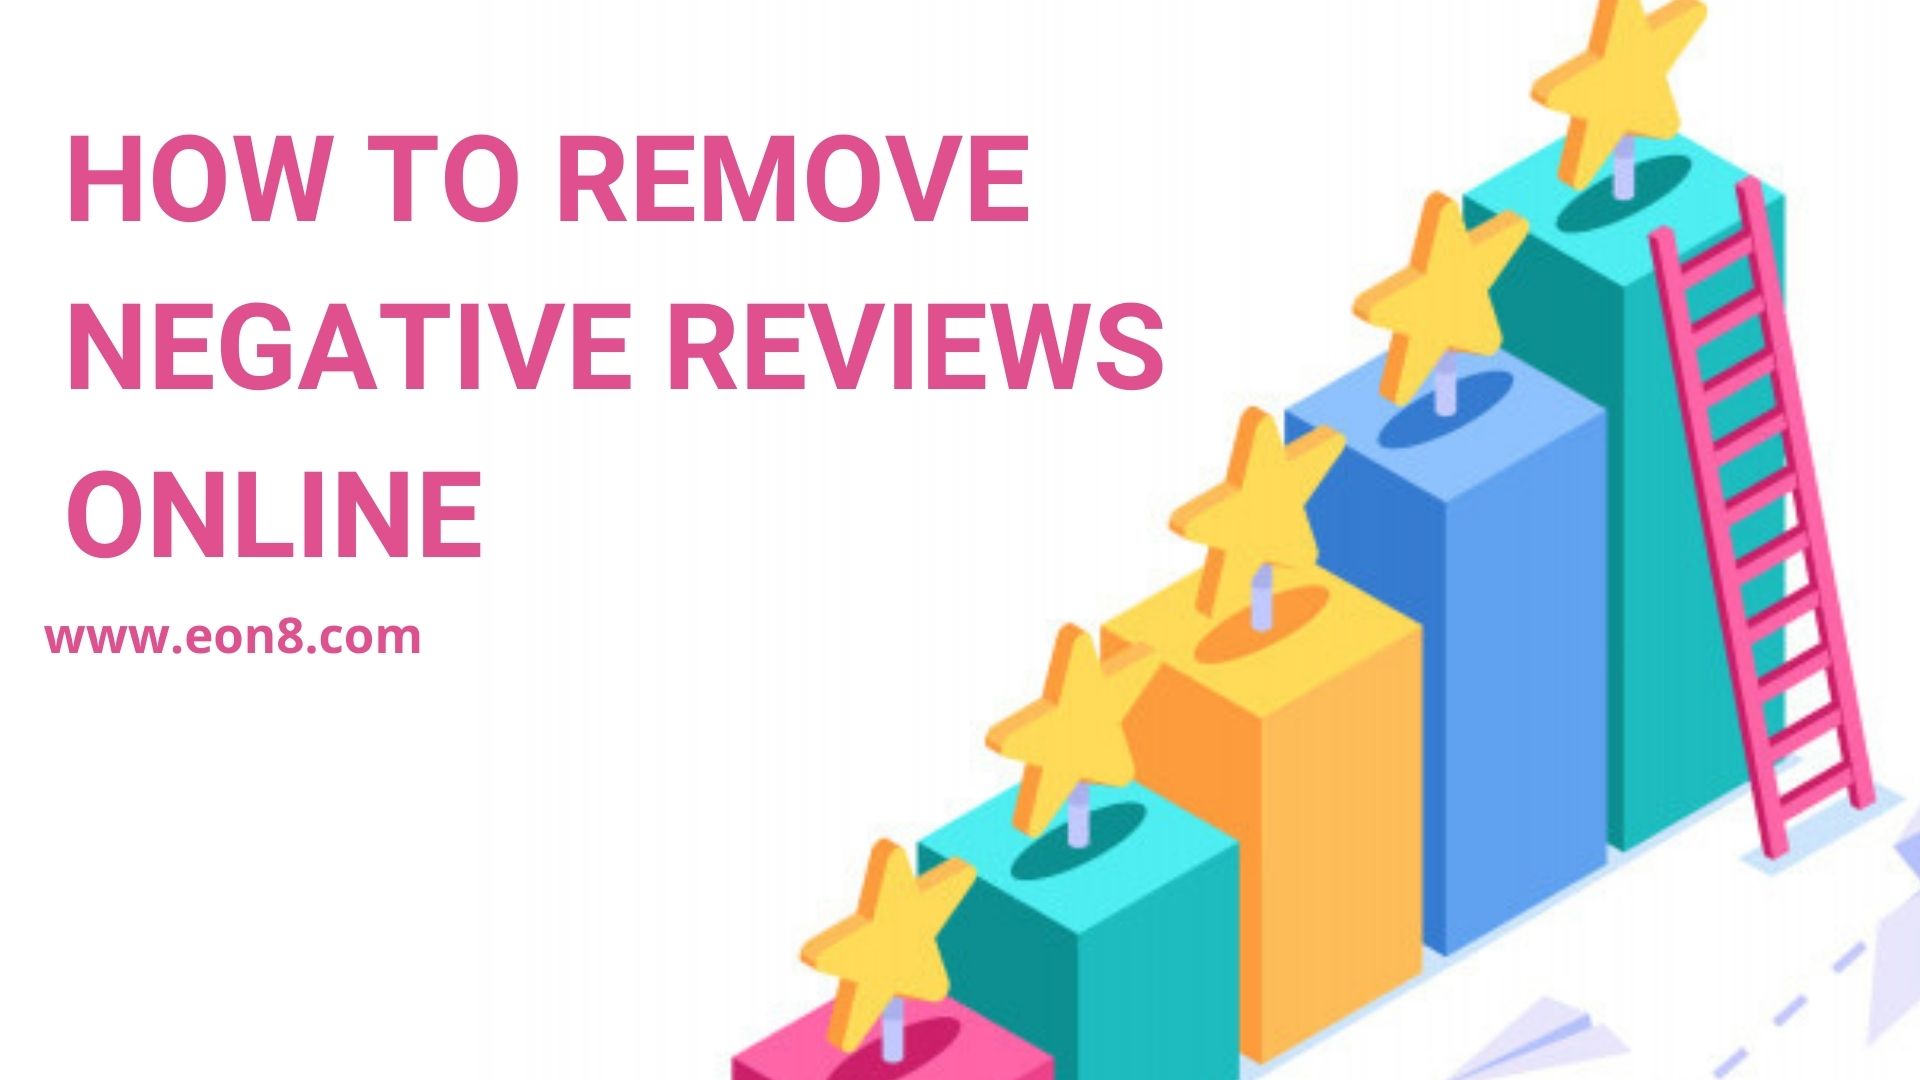 How To Remove Negative Reviews Online